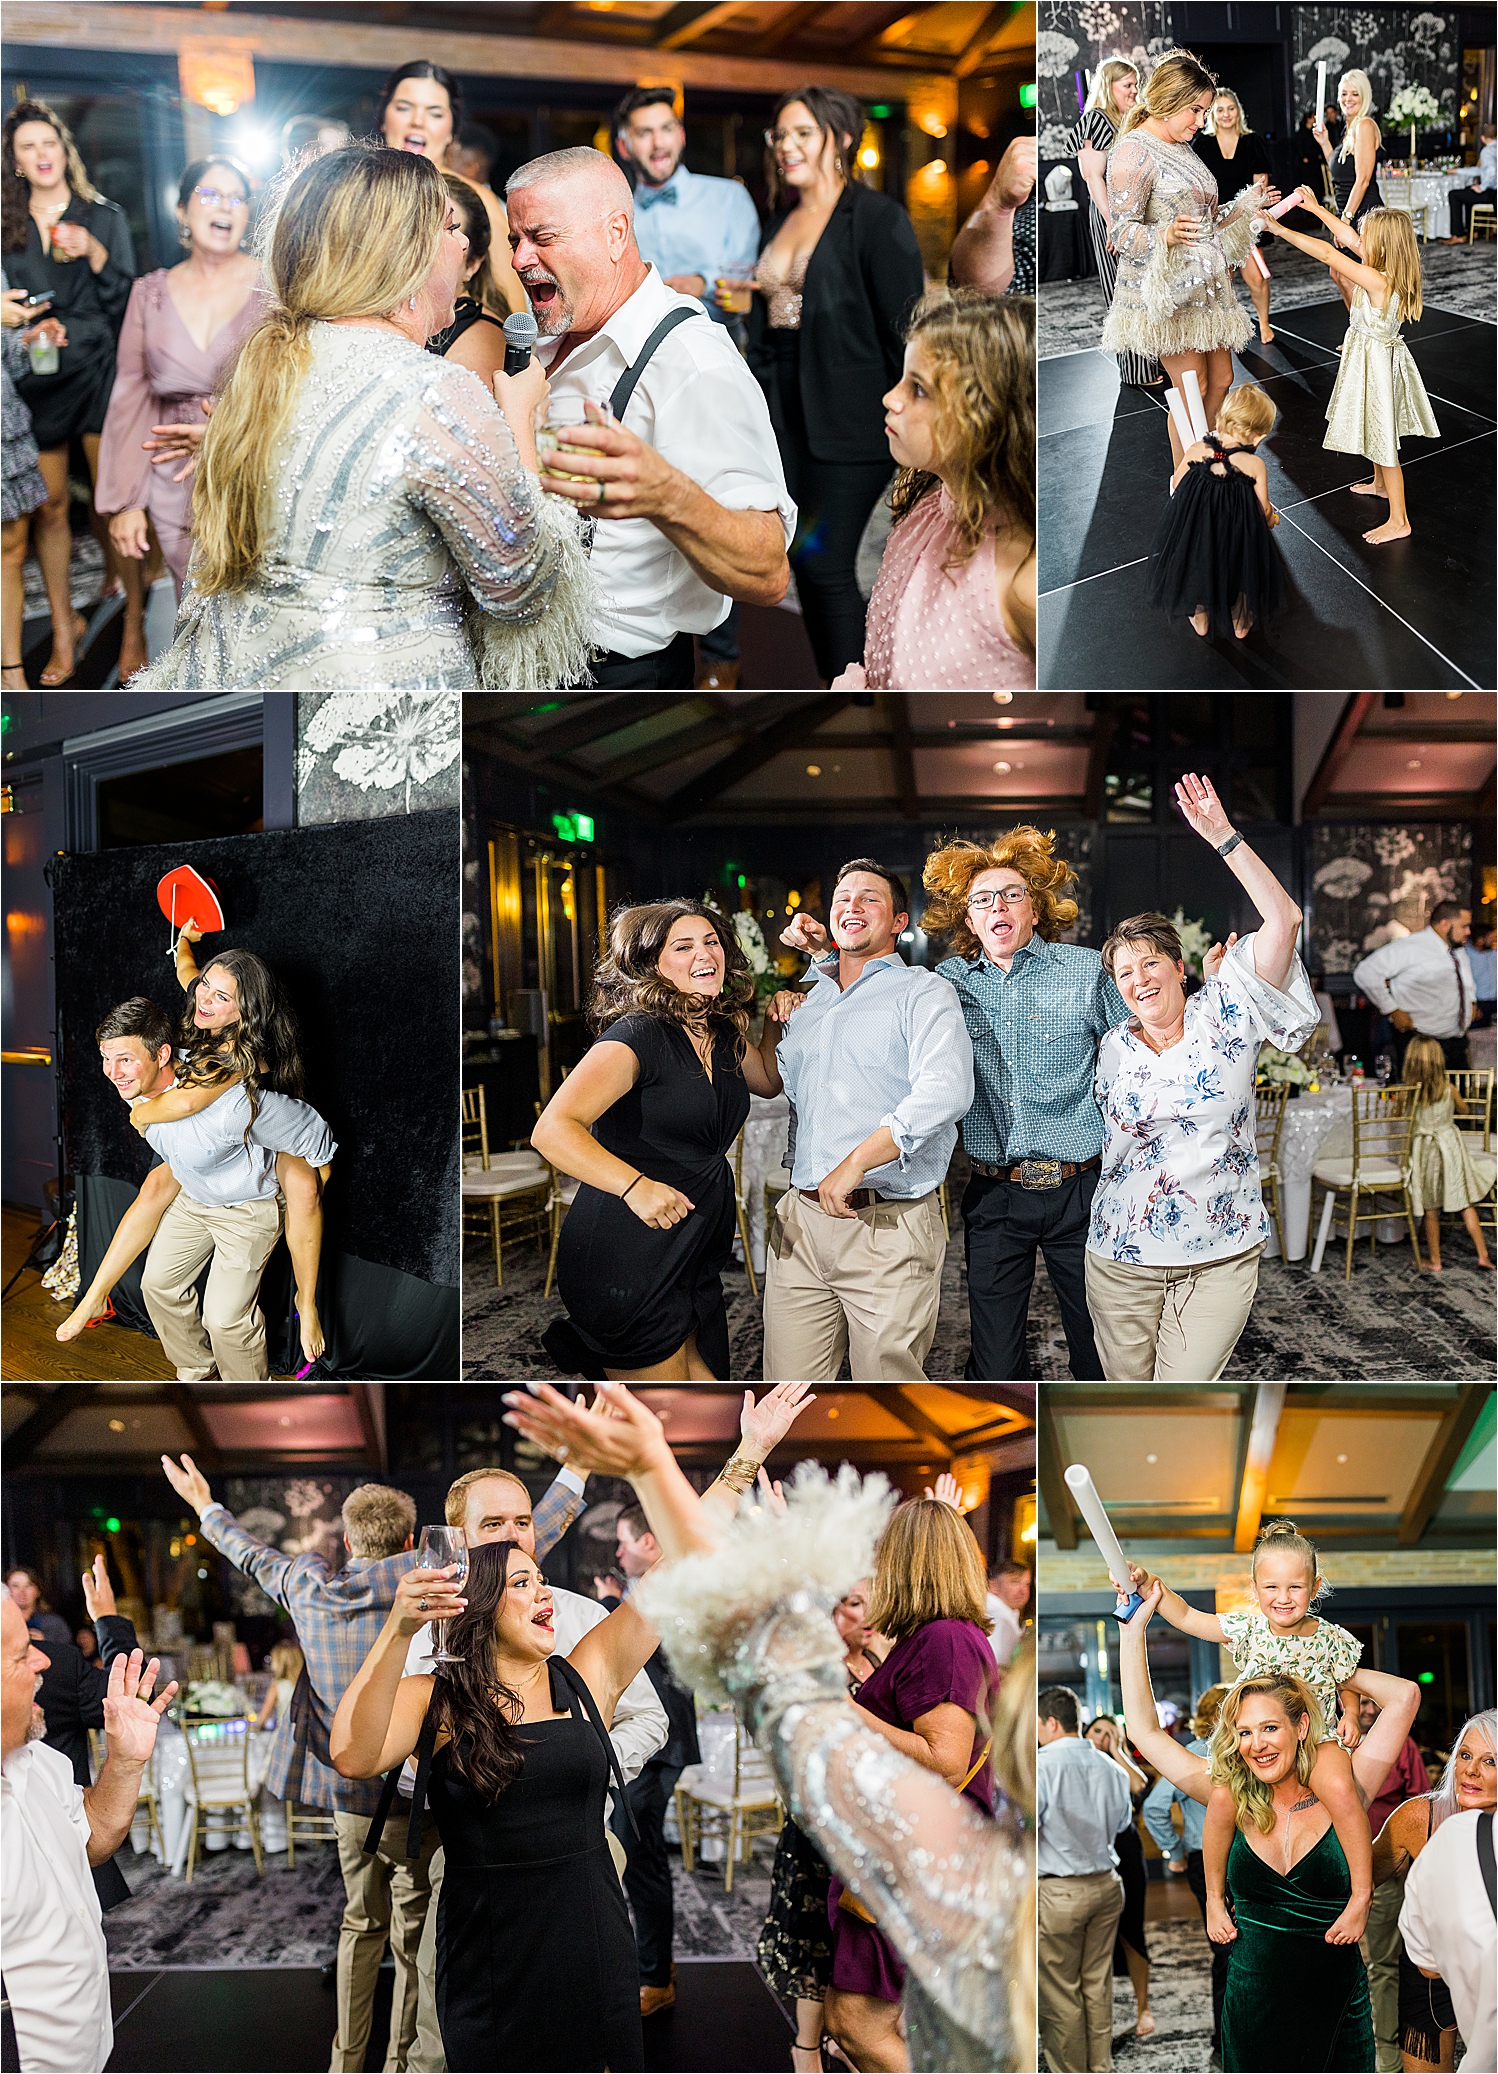 Guests singing and dancing at a wedding reception at The Redberry Estate in San Antonio, Texas 